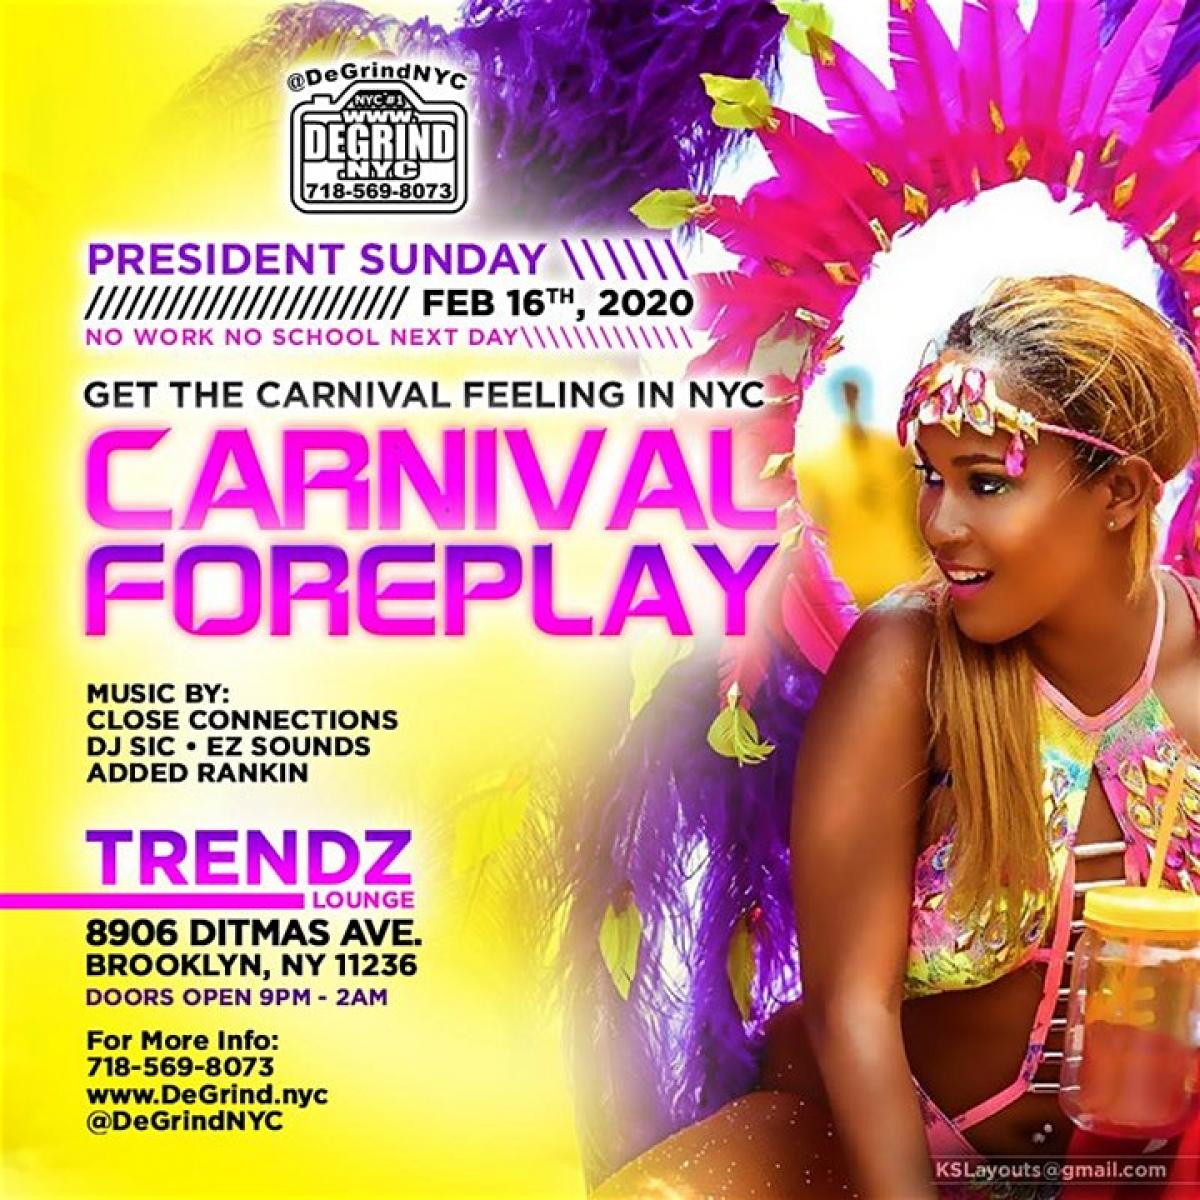 Carnival Foreplay flyer or graphic.